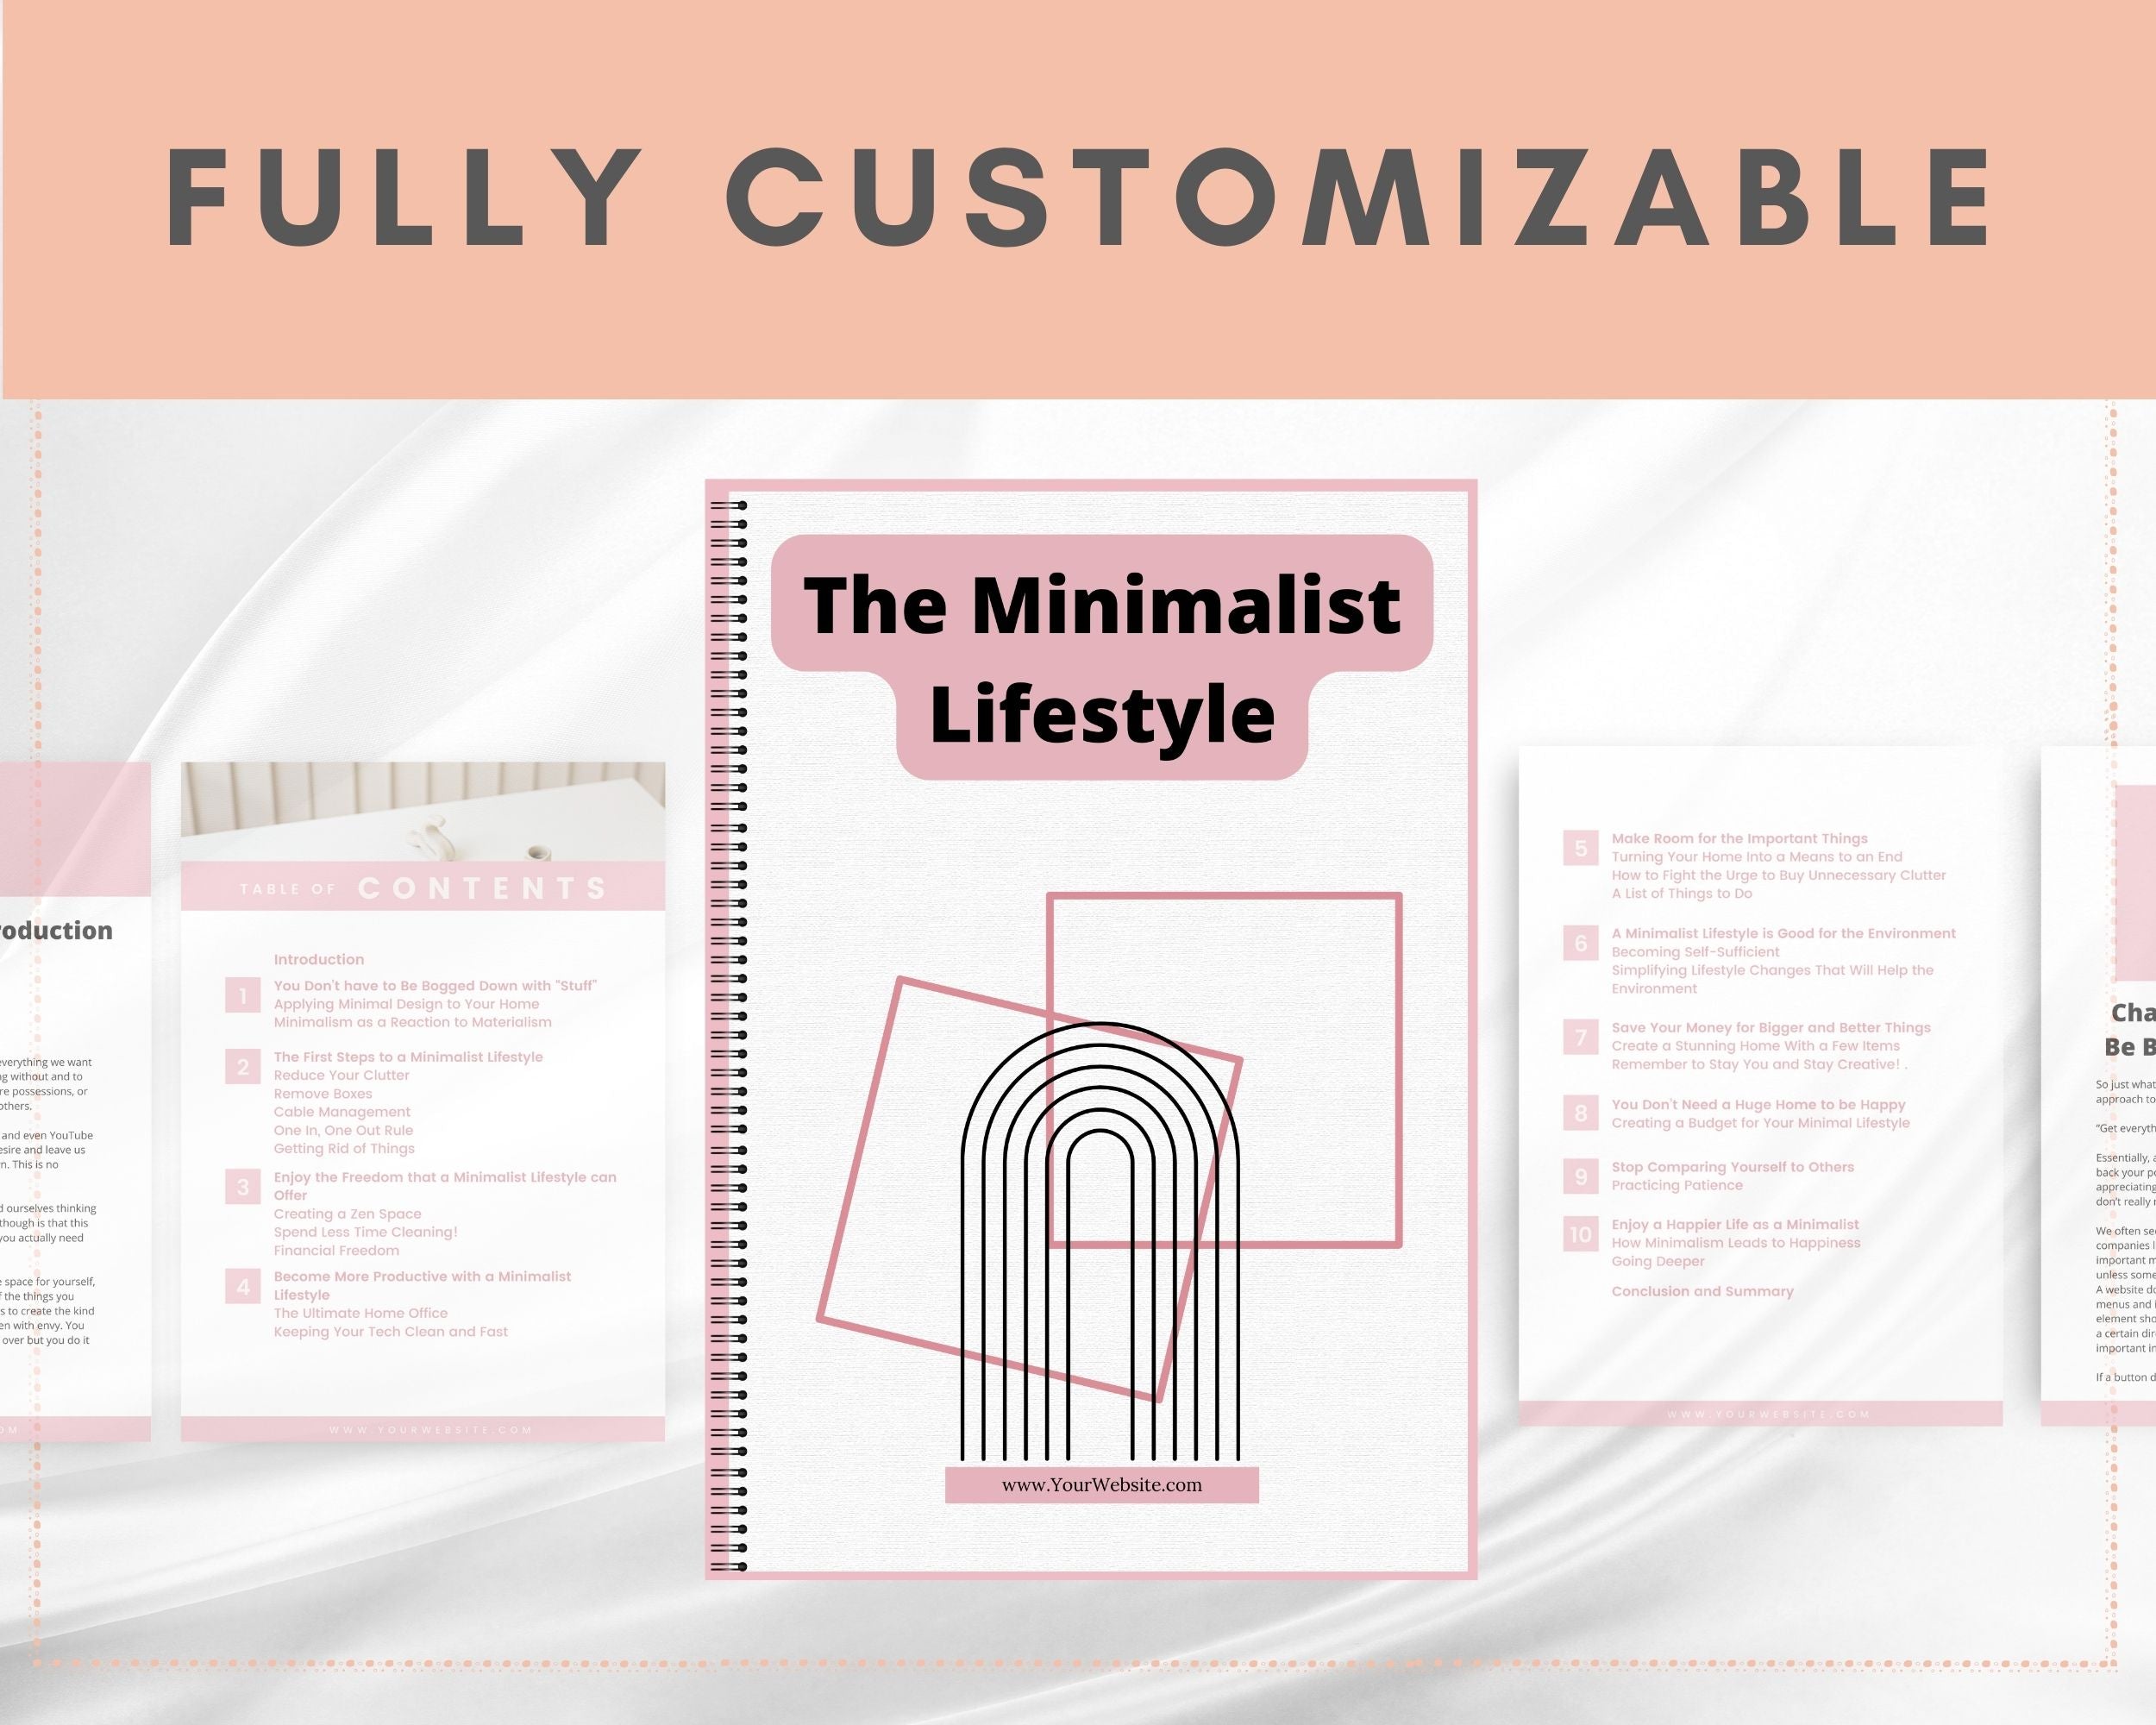 Editable The Minimalist Lifestyle Ebook | Done-for-You Ebook in Canva | Rebrandable and Resizable Canva Template